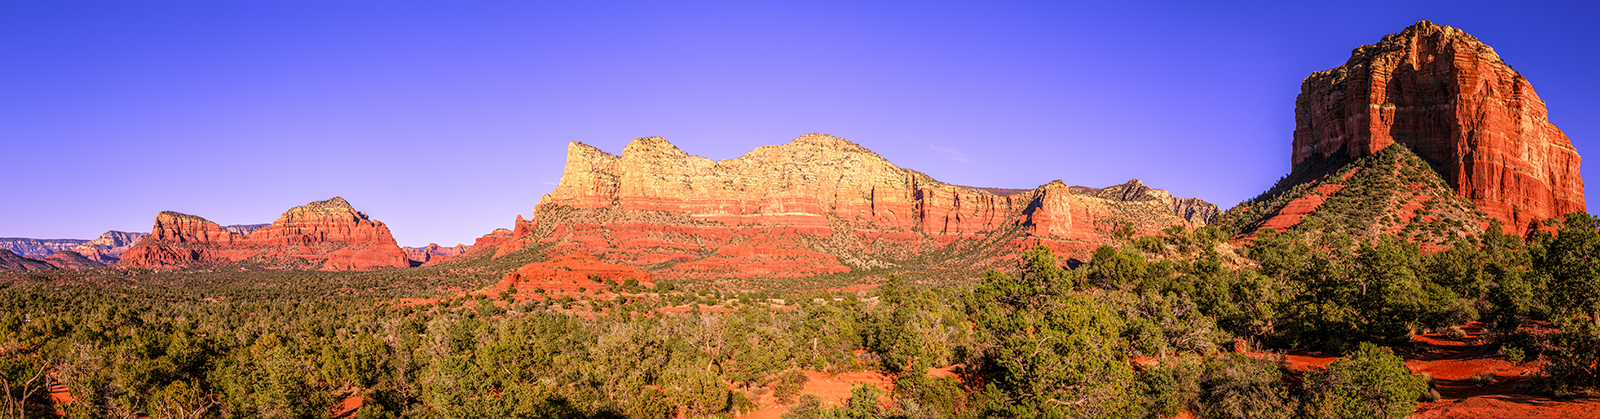 Clearinghouse CDFI - AZ Office location header image